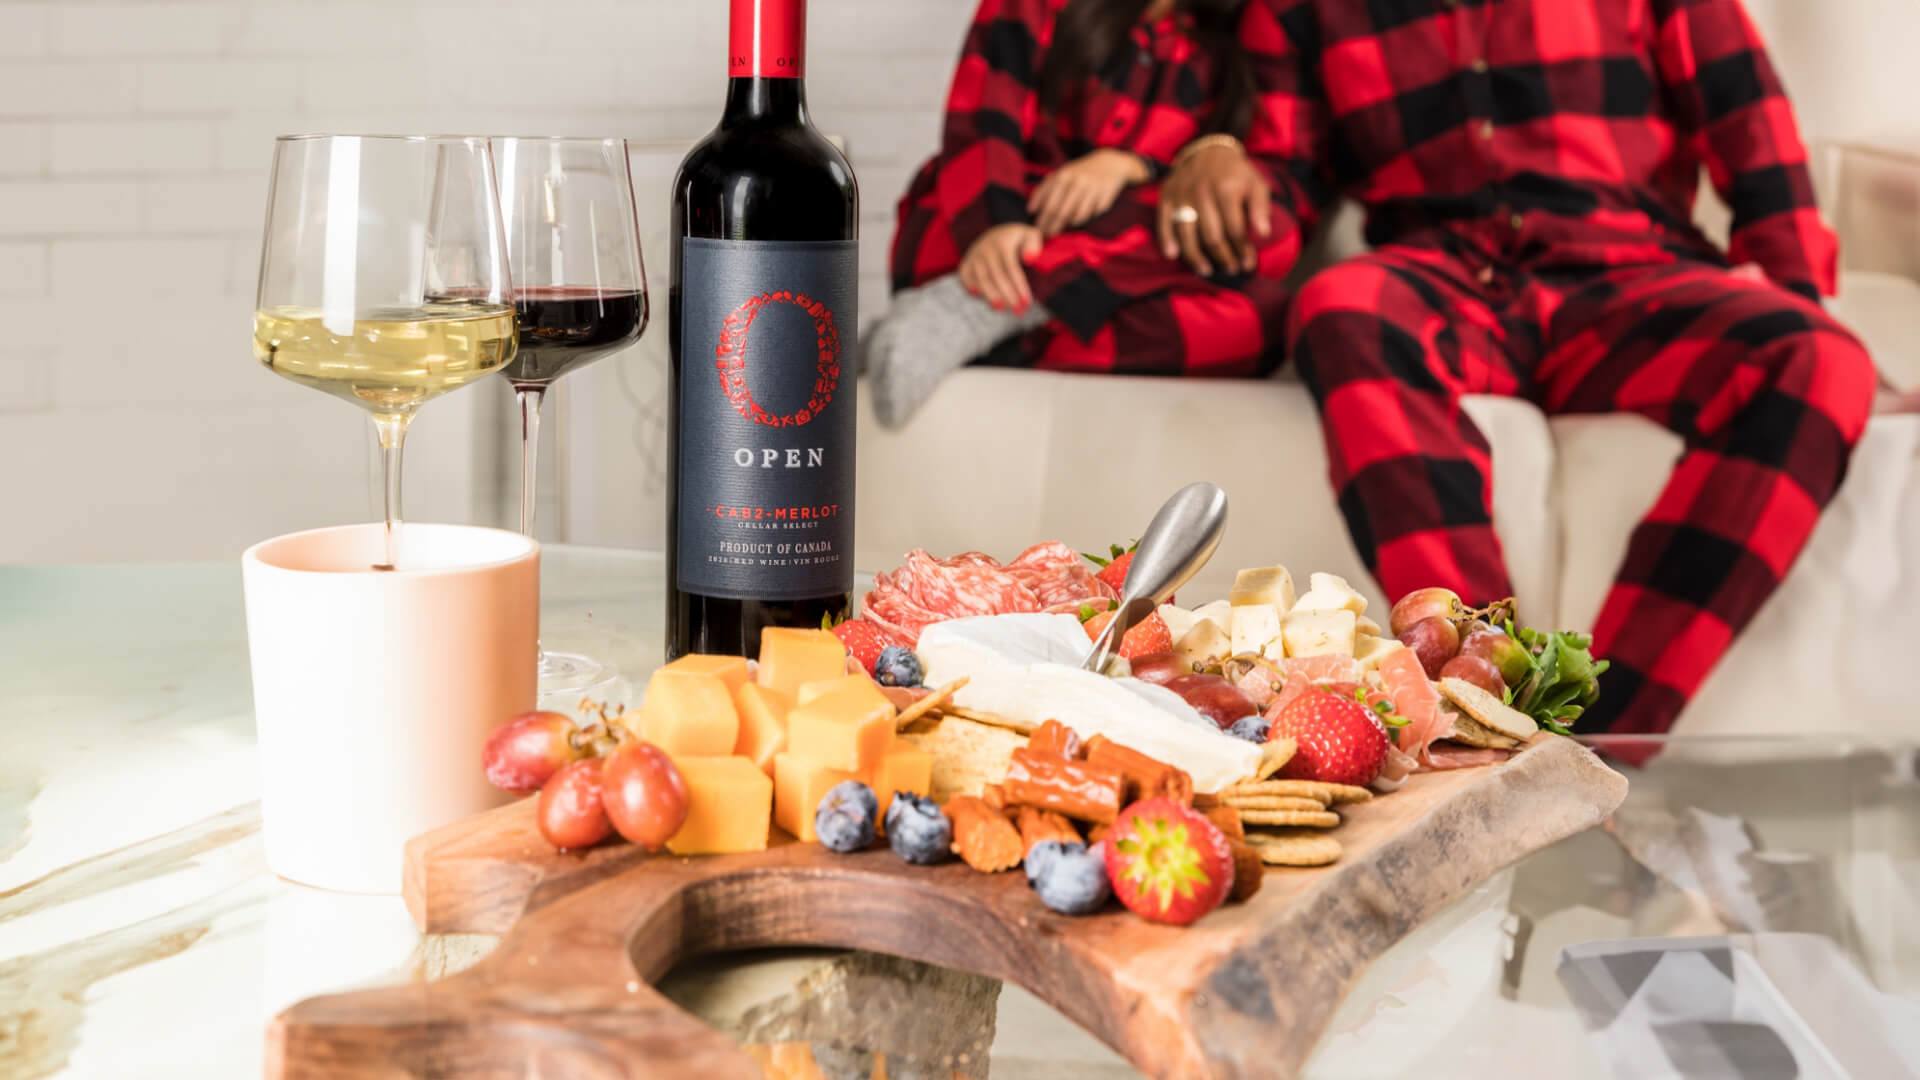 Couple cozied up, in matching plaid pajamas enjoying Open Cab-Merlot wine and a charcuterie board.     